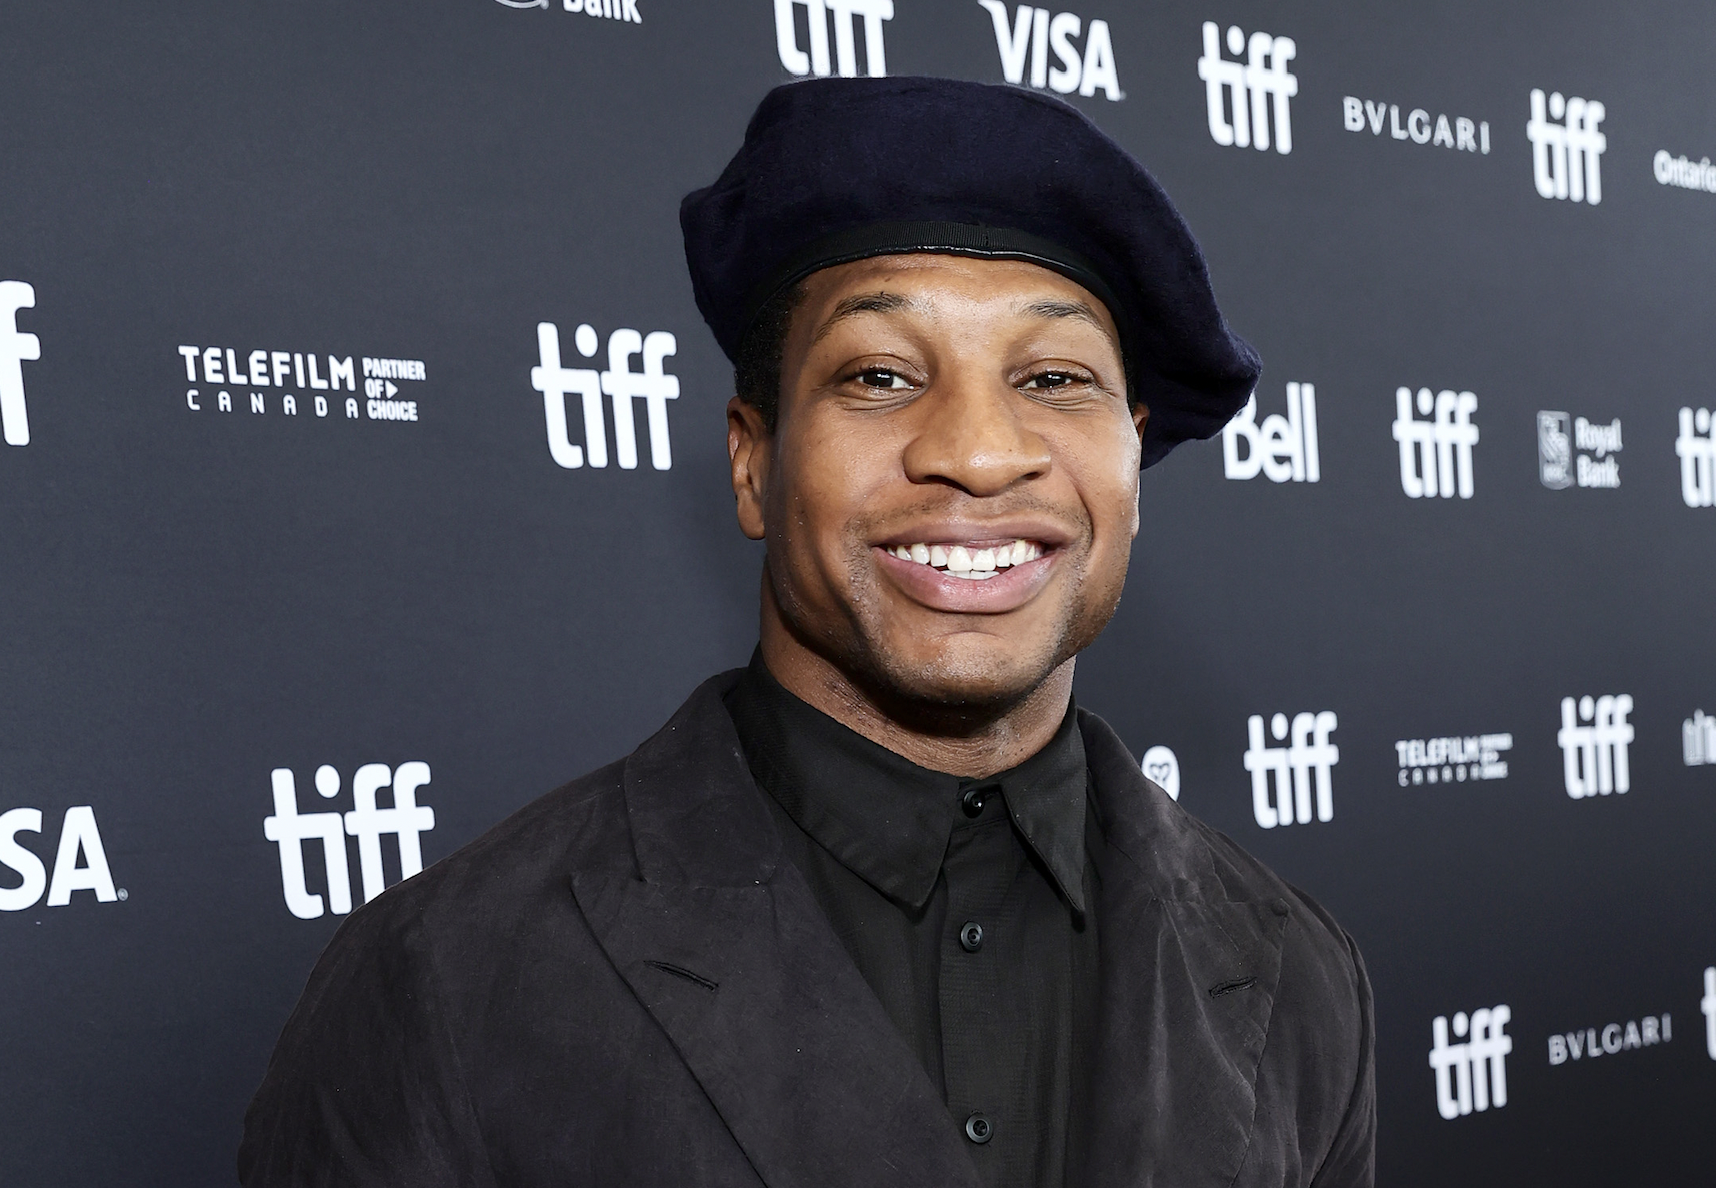 Jonathan Majors Gained 10 Pounds of Muscle to Play Kang in the MCU